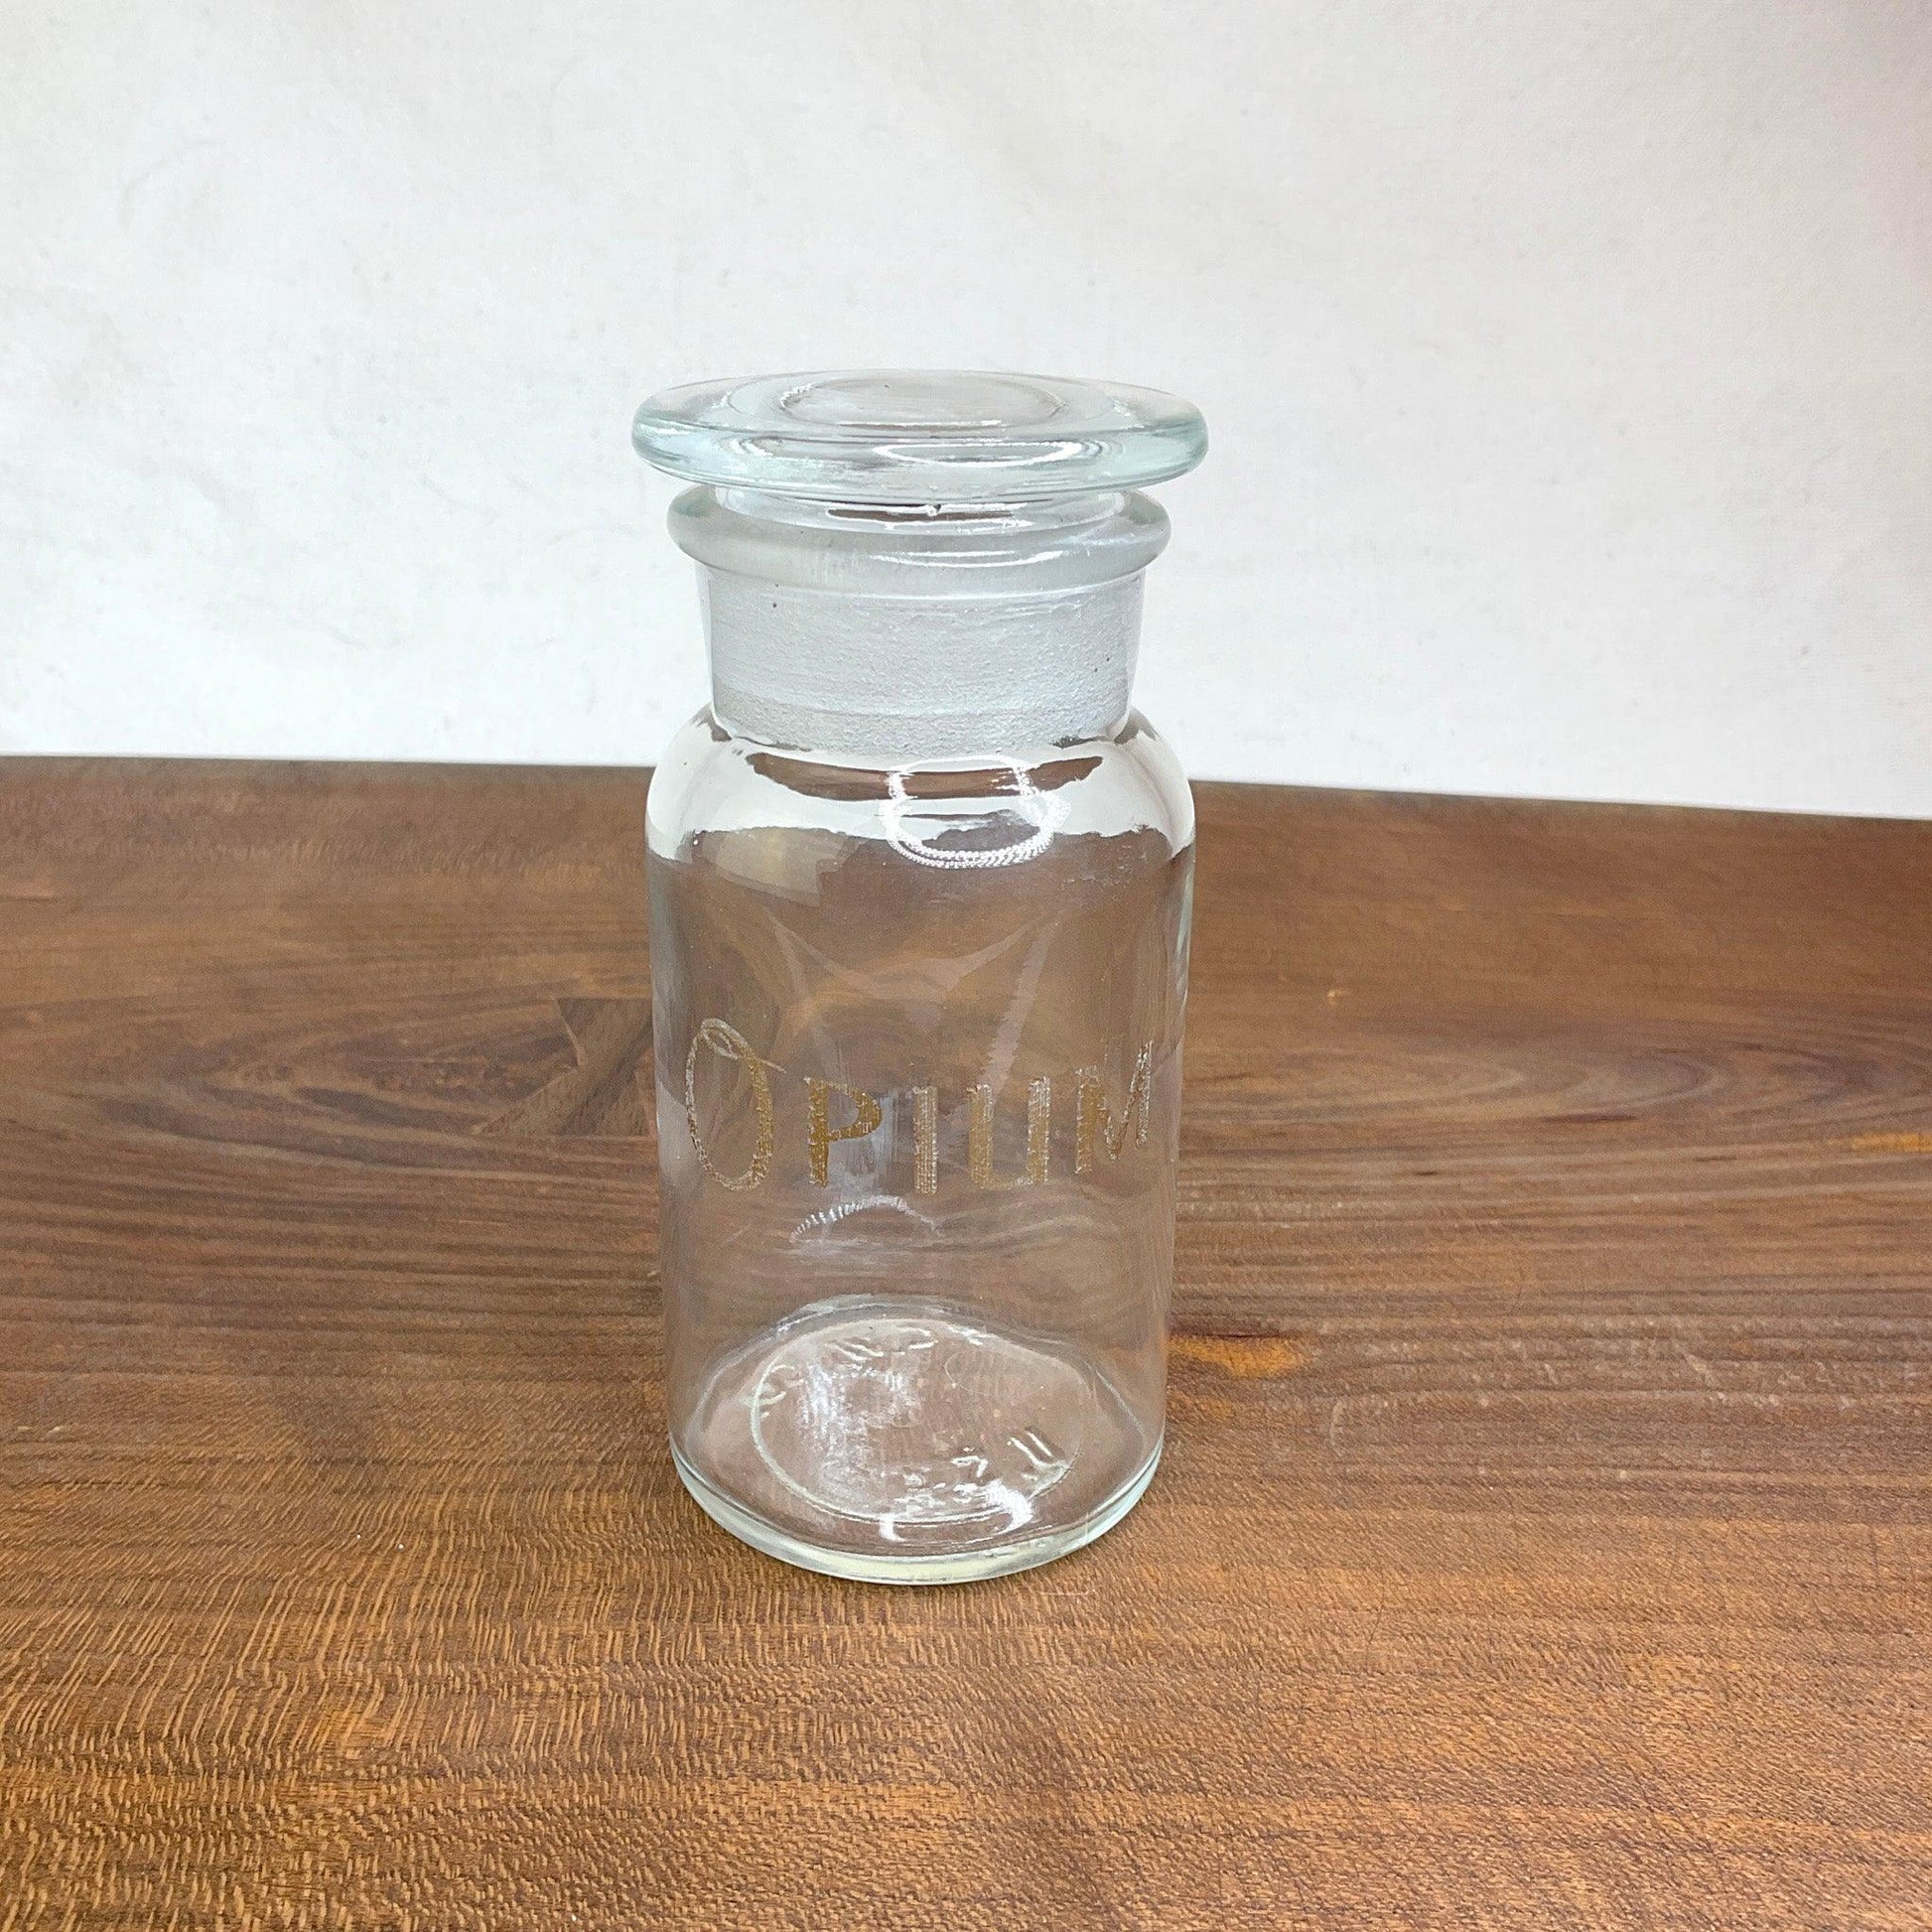 Opium Apothecary Jar - Offensively Domestic